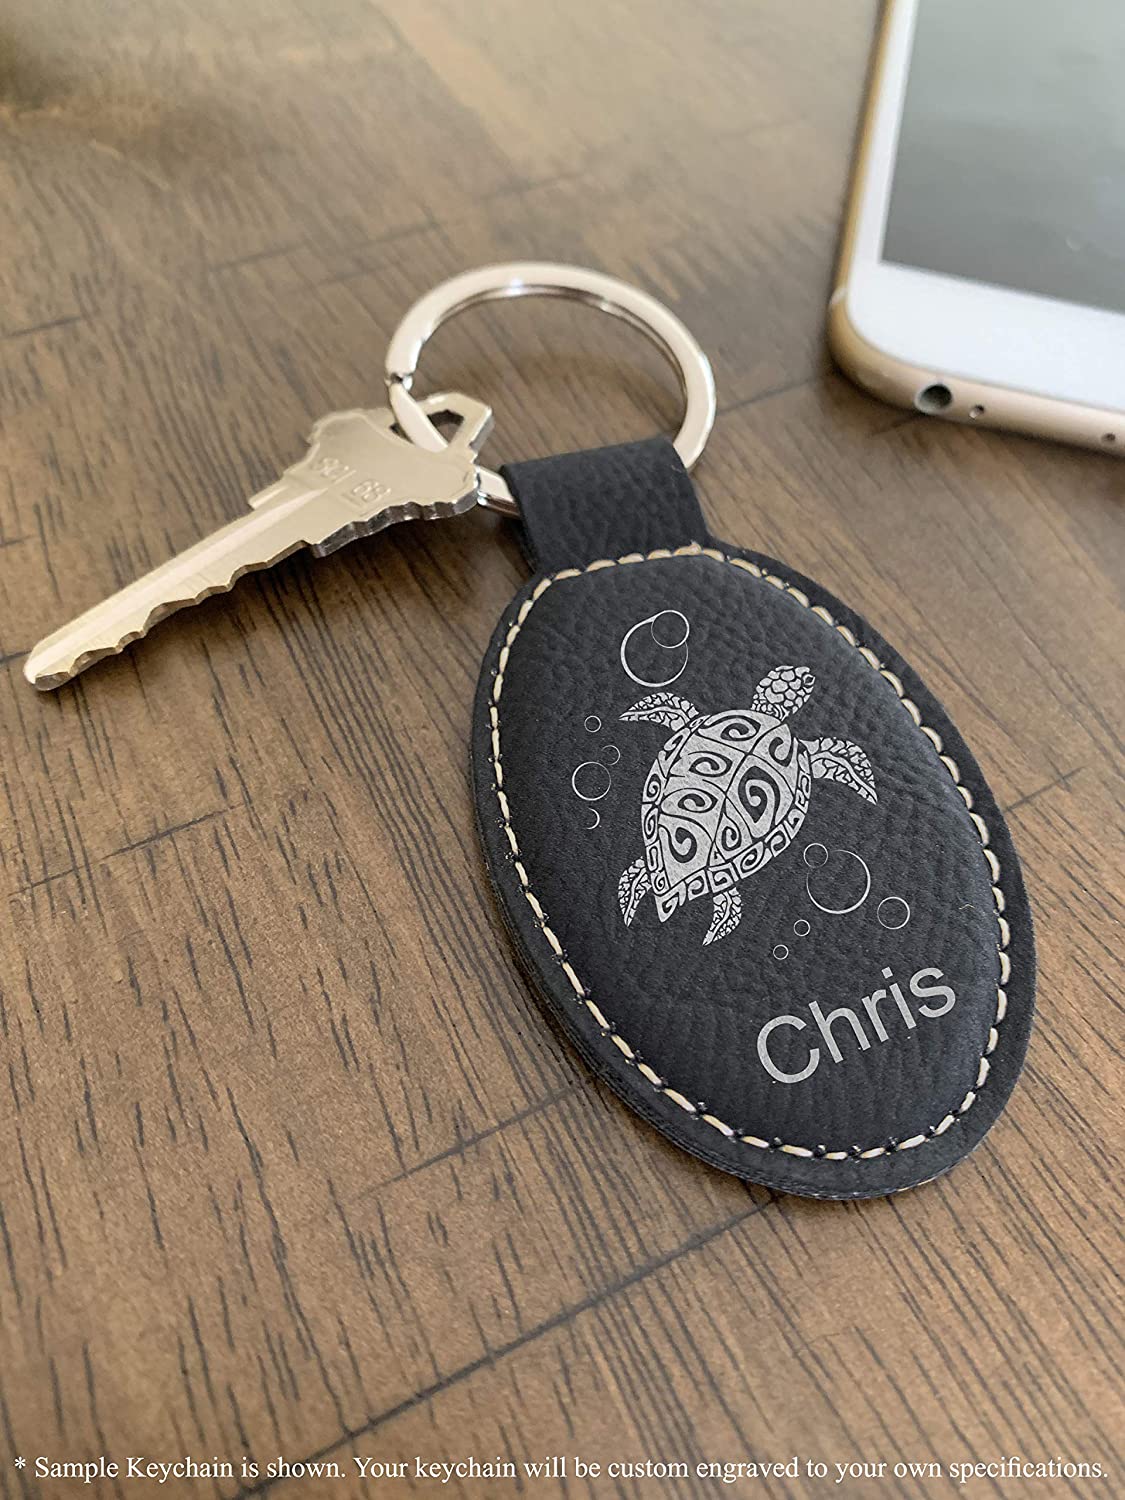 Faux Leather Oval Keychain, Baseball Ball, Personalized Engraving Included